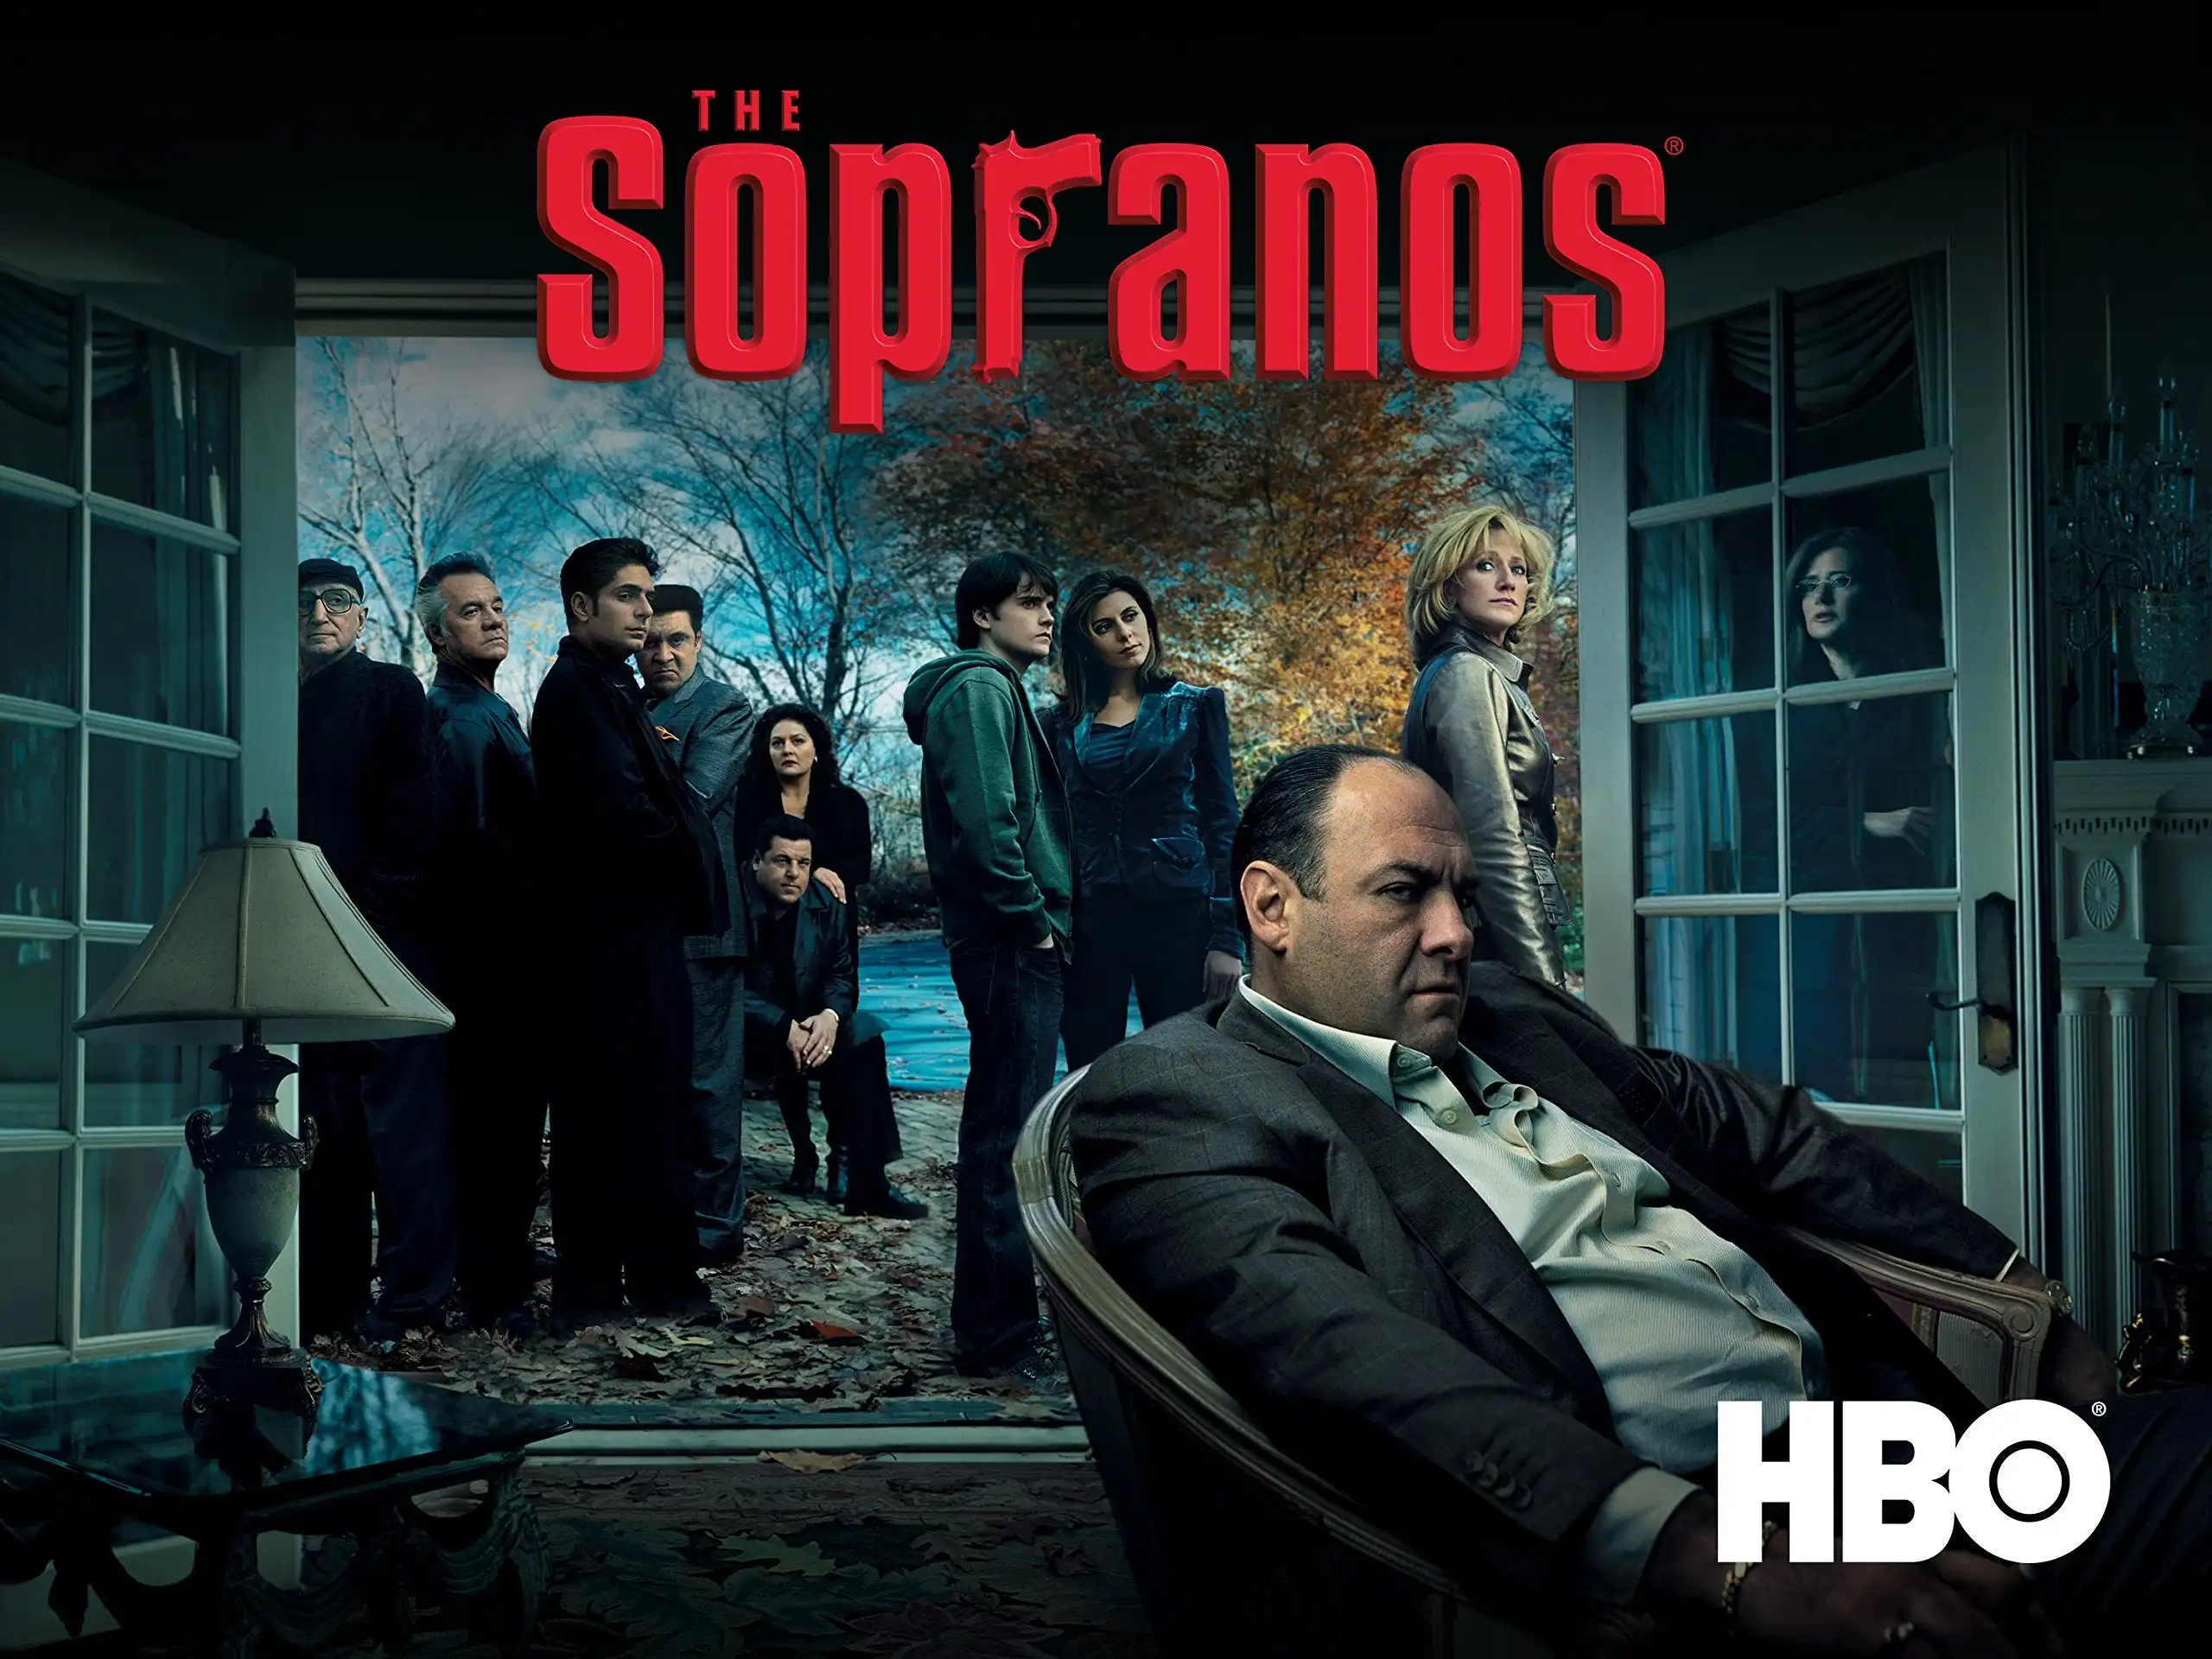 HBO Full Series TV Shows/Documentaries: The Sopranos, The Wire